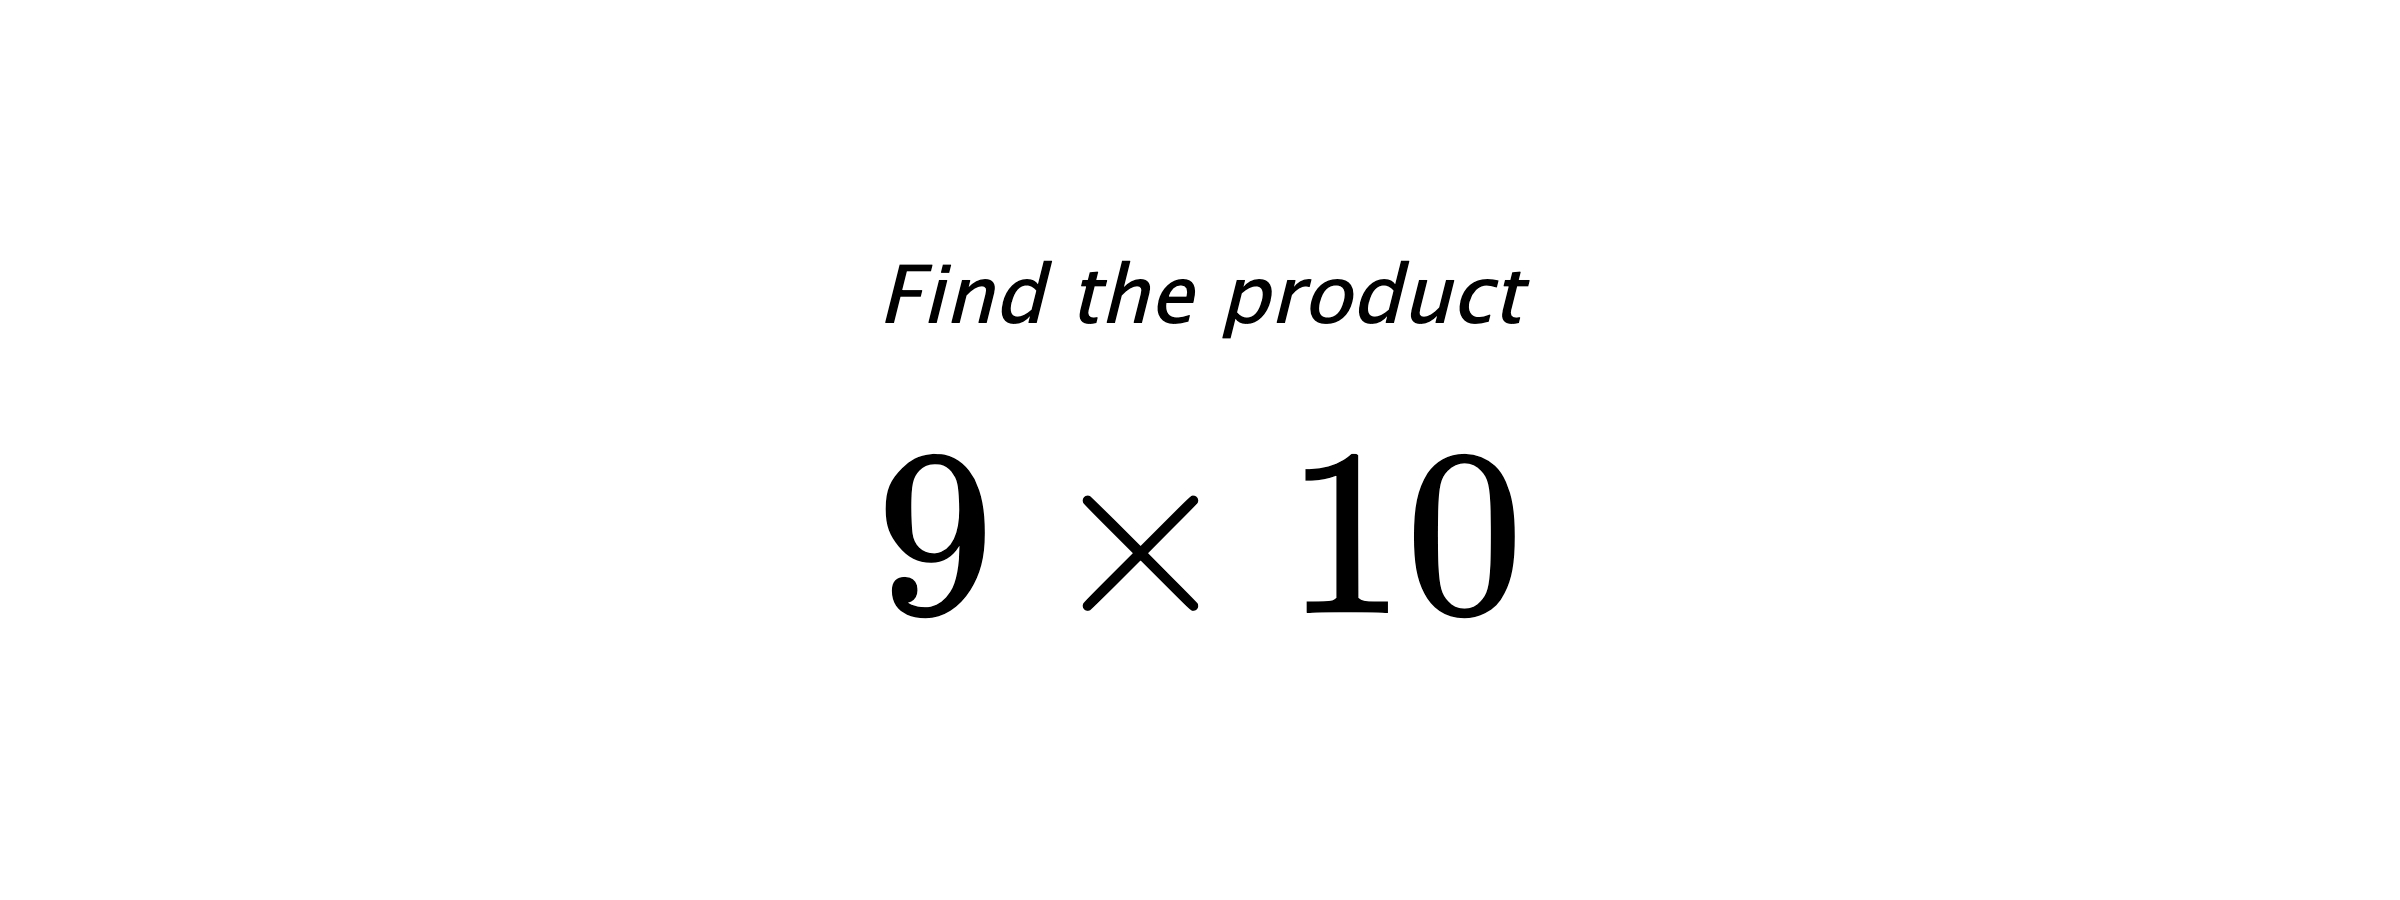 Find the product $ 9 \times 10 $